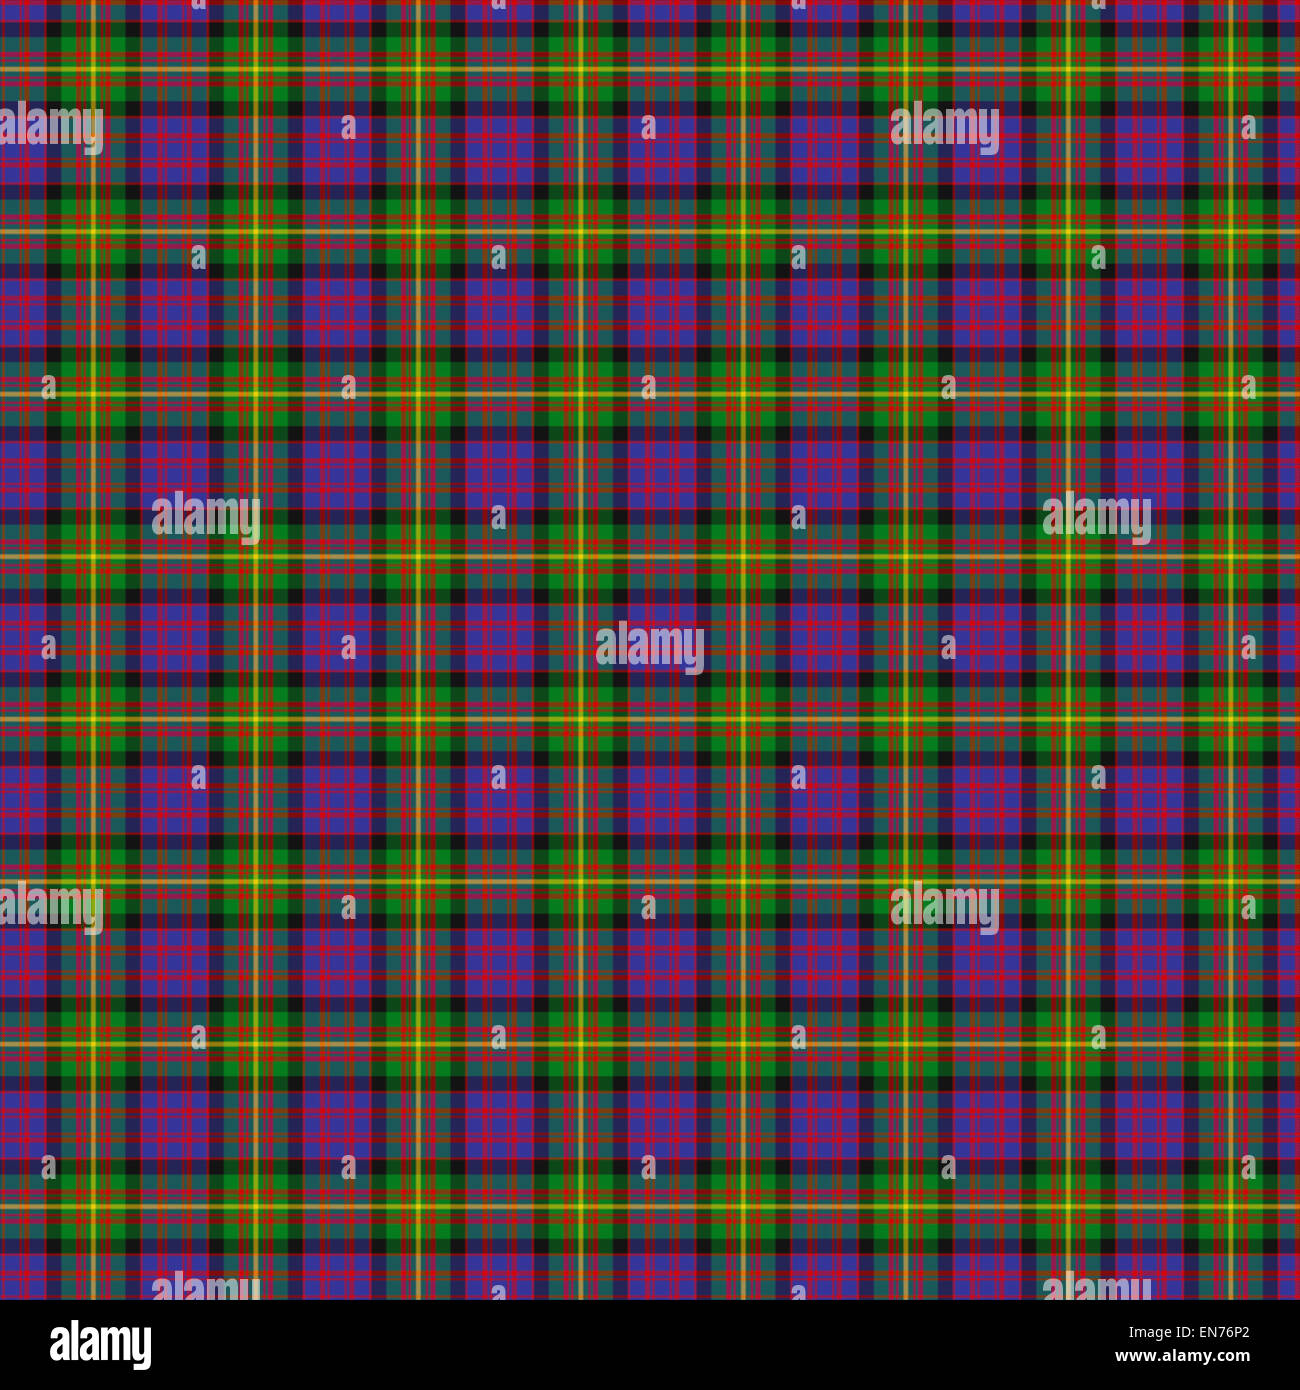 A seamless patterned tile of the clan Carnegie tartan. Stock Photo